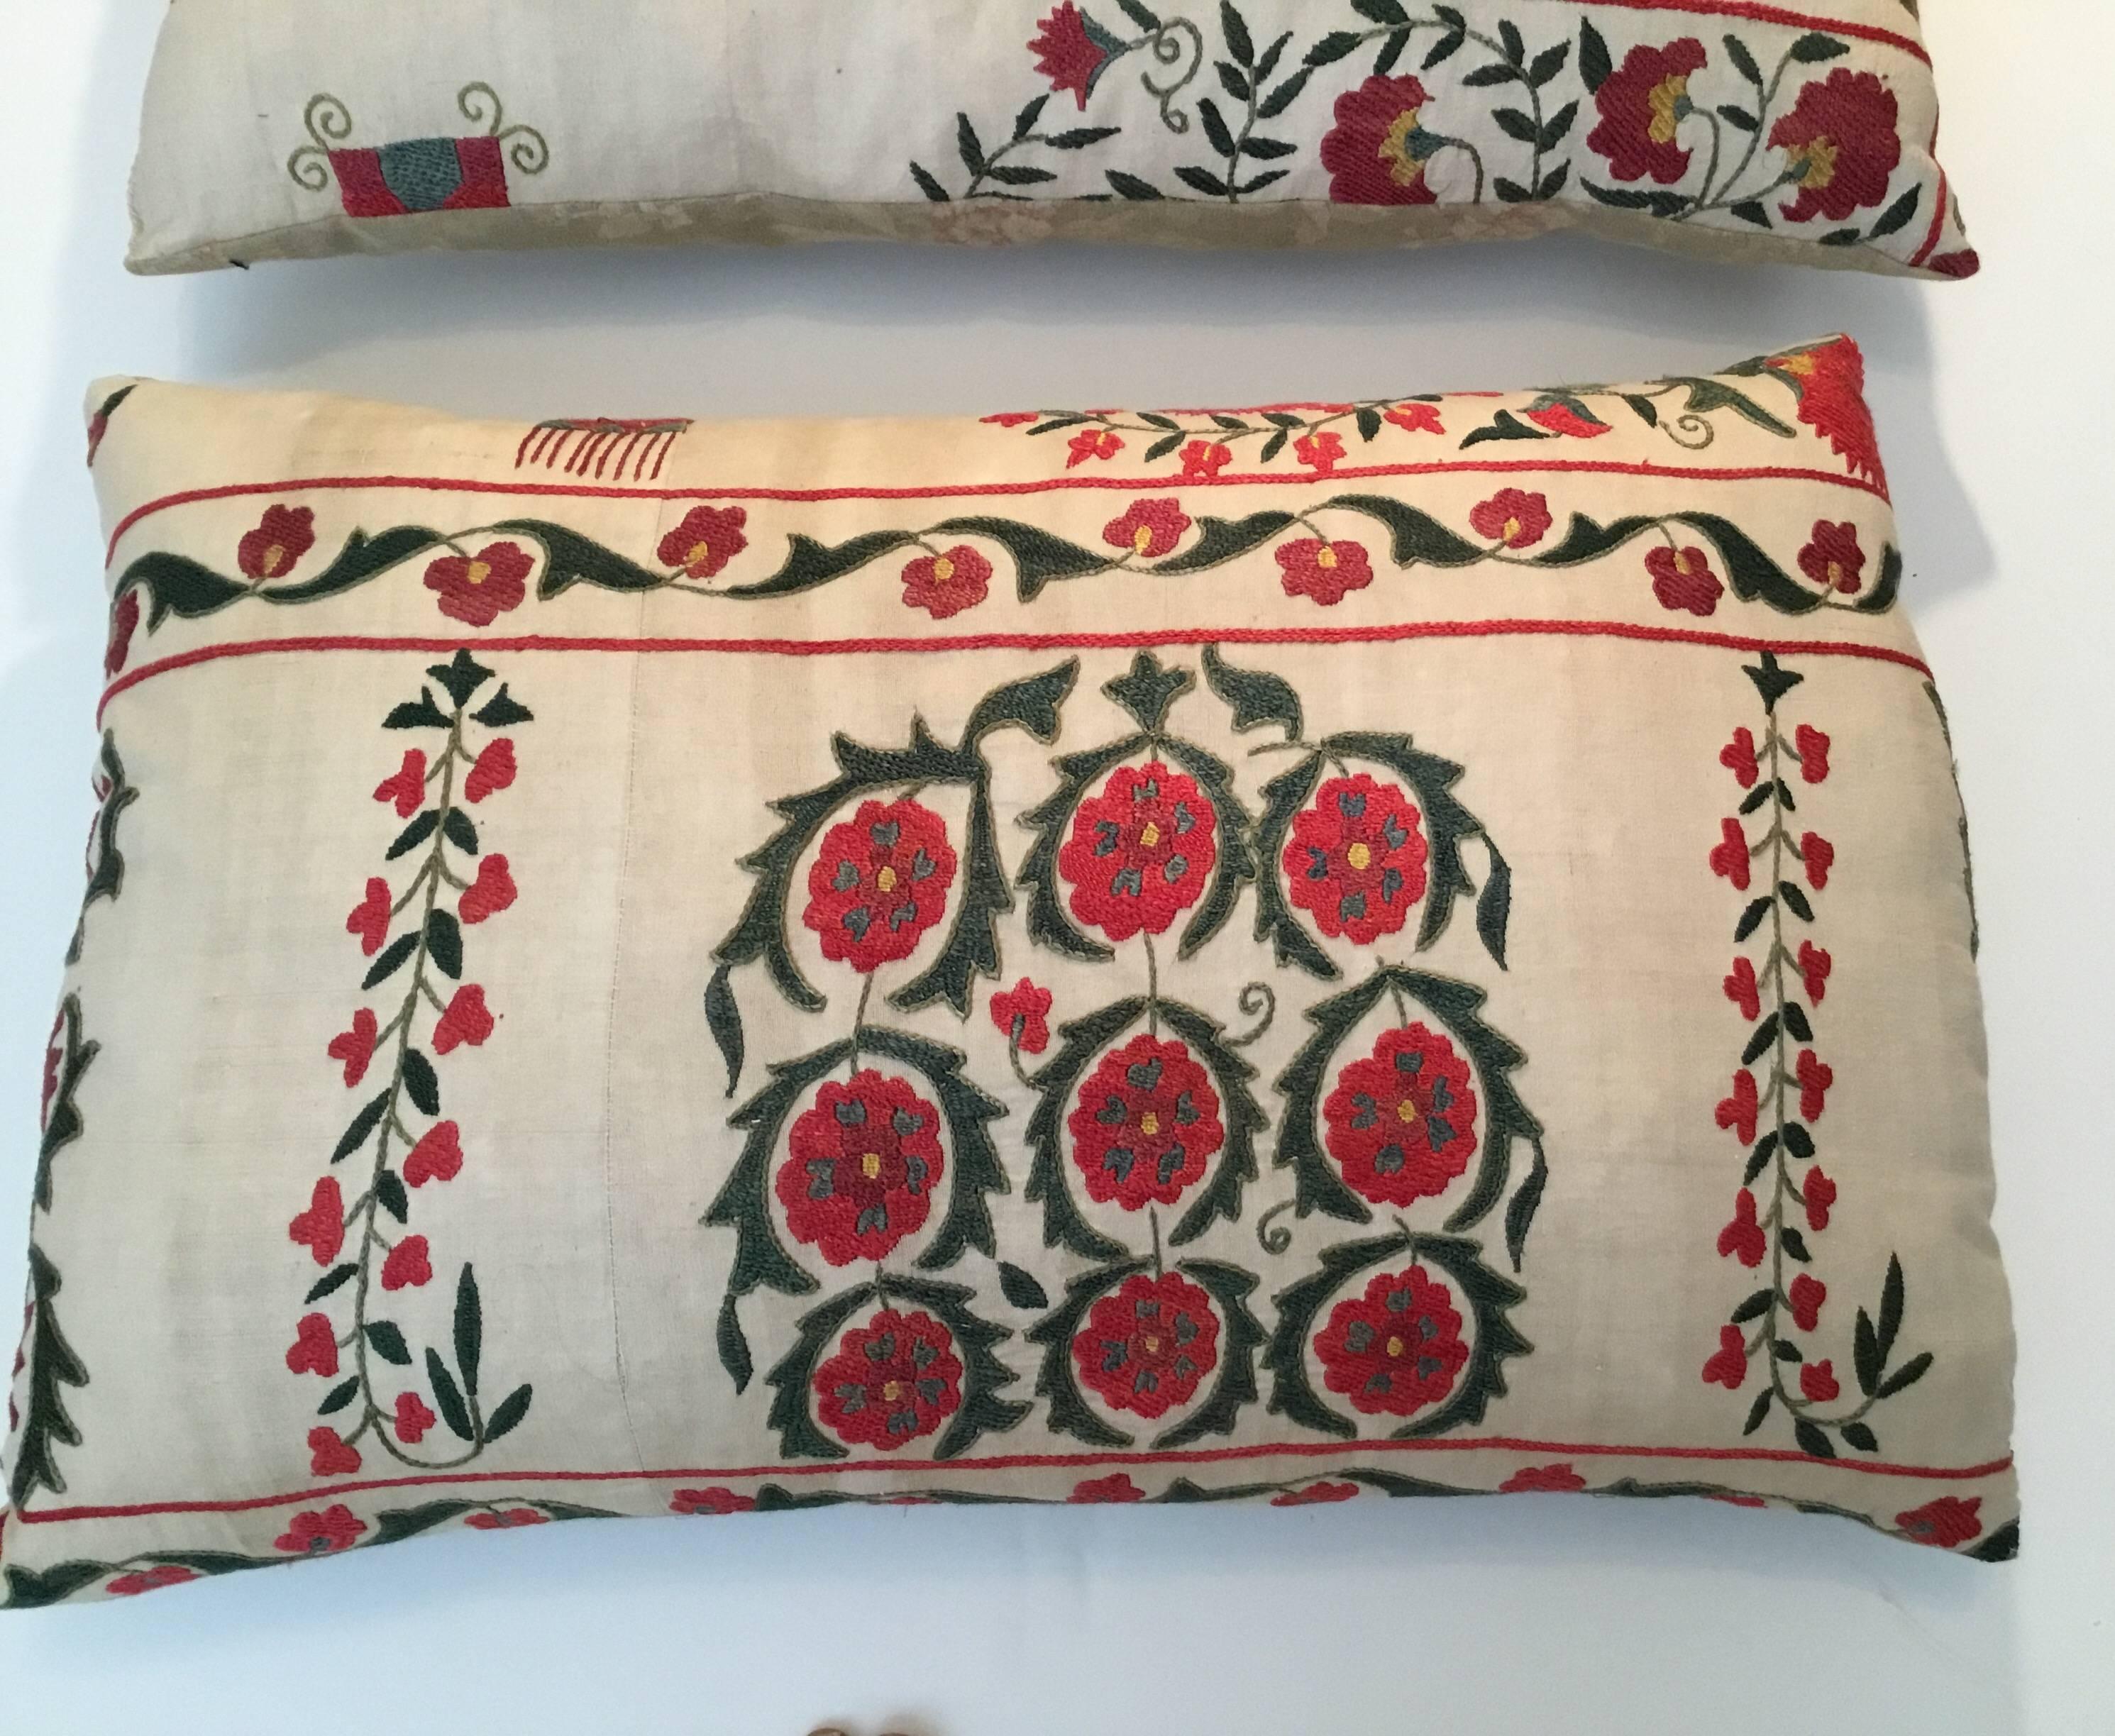 Beautiful pair of pillows made of silk hand embroidery and on cotton background.
With colorful floral and vine motifs.
Muted floral cotton backing and fresh inserts.